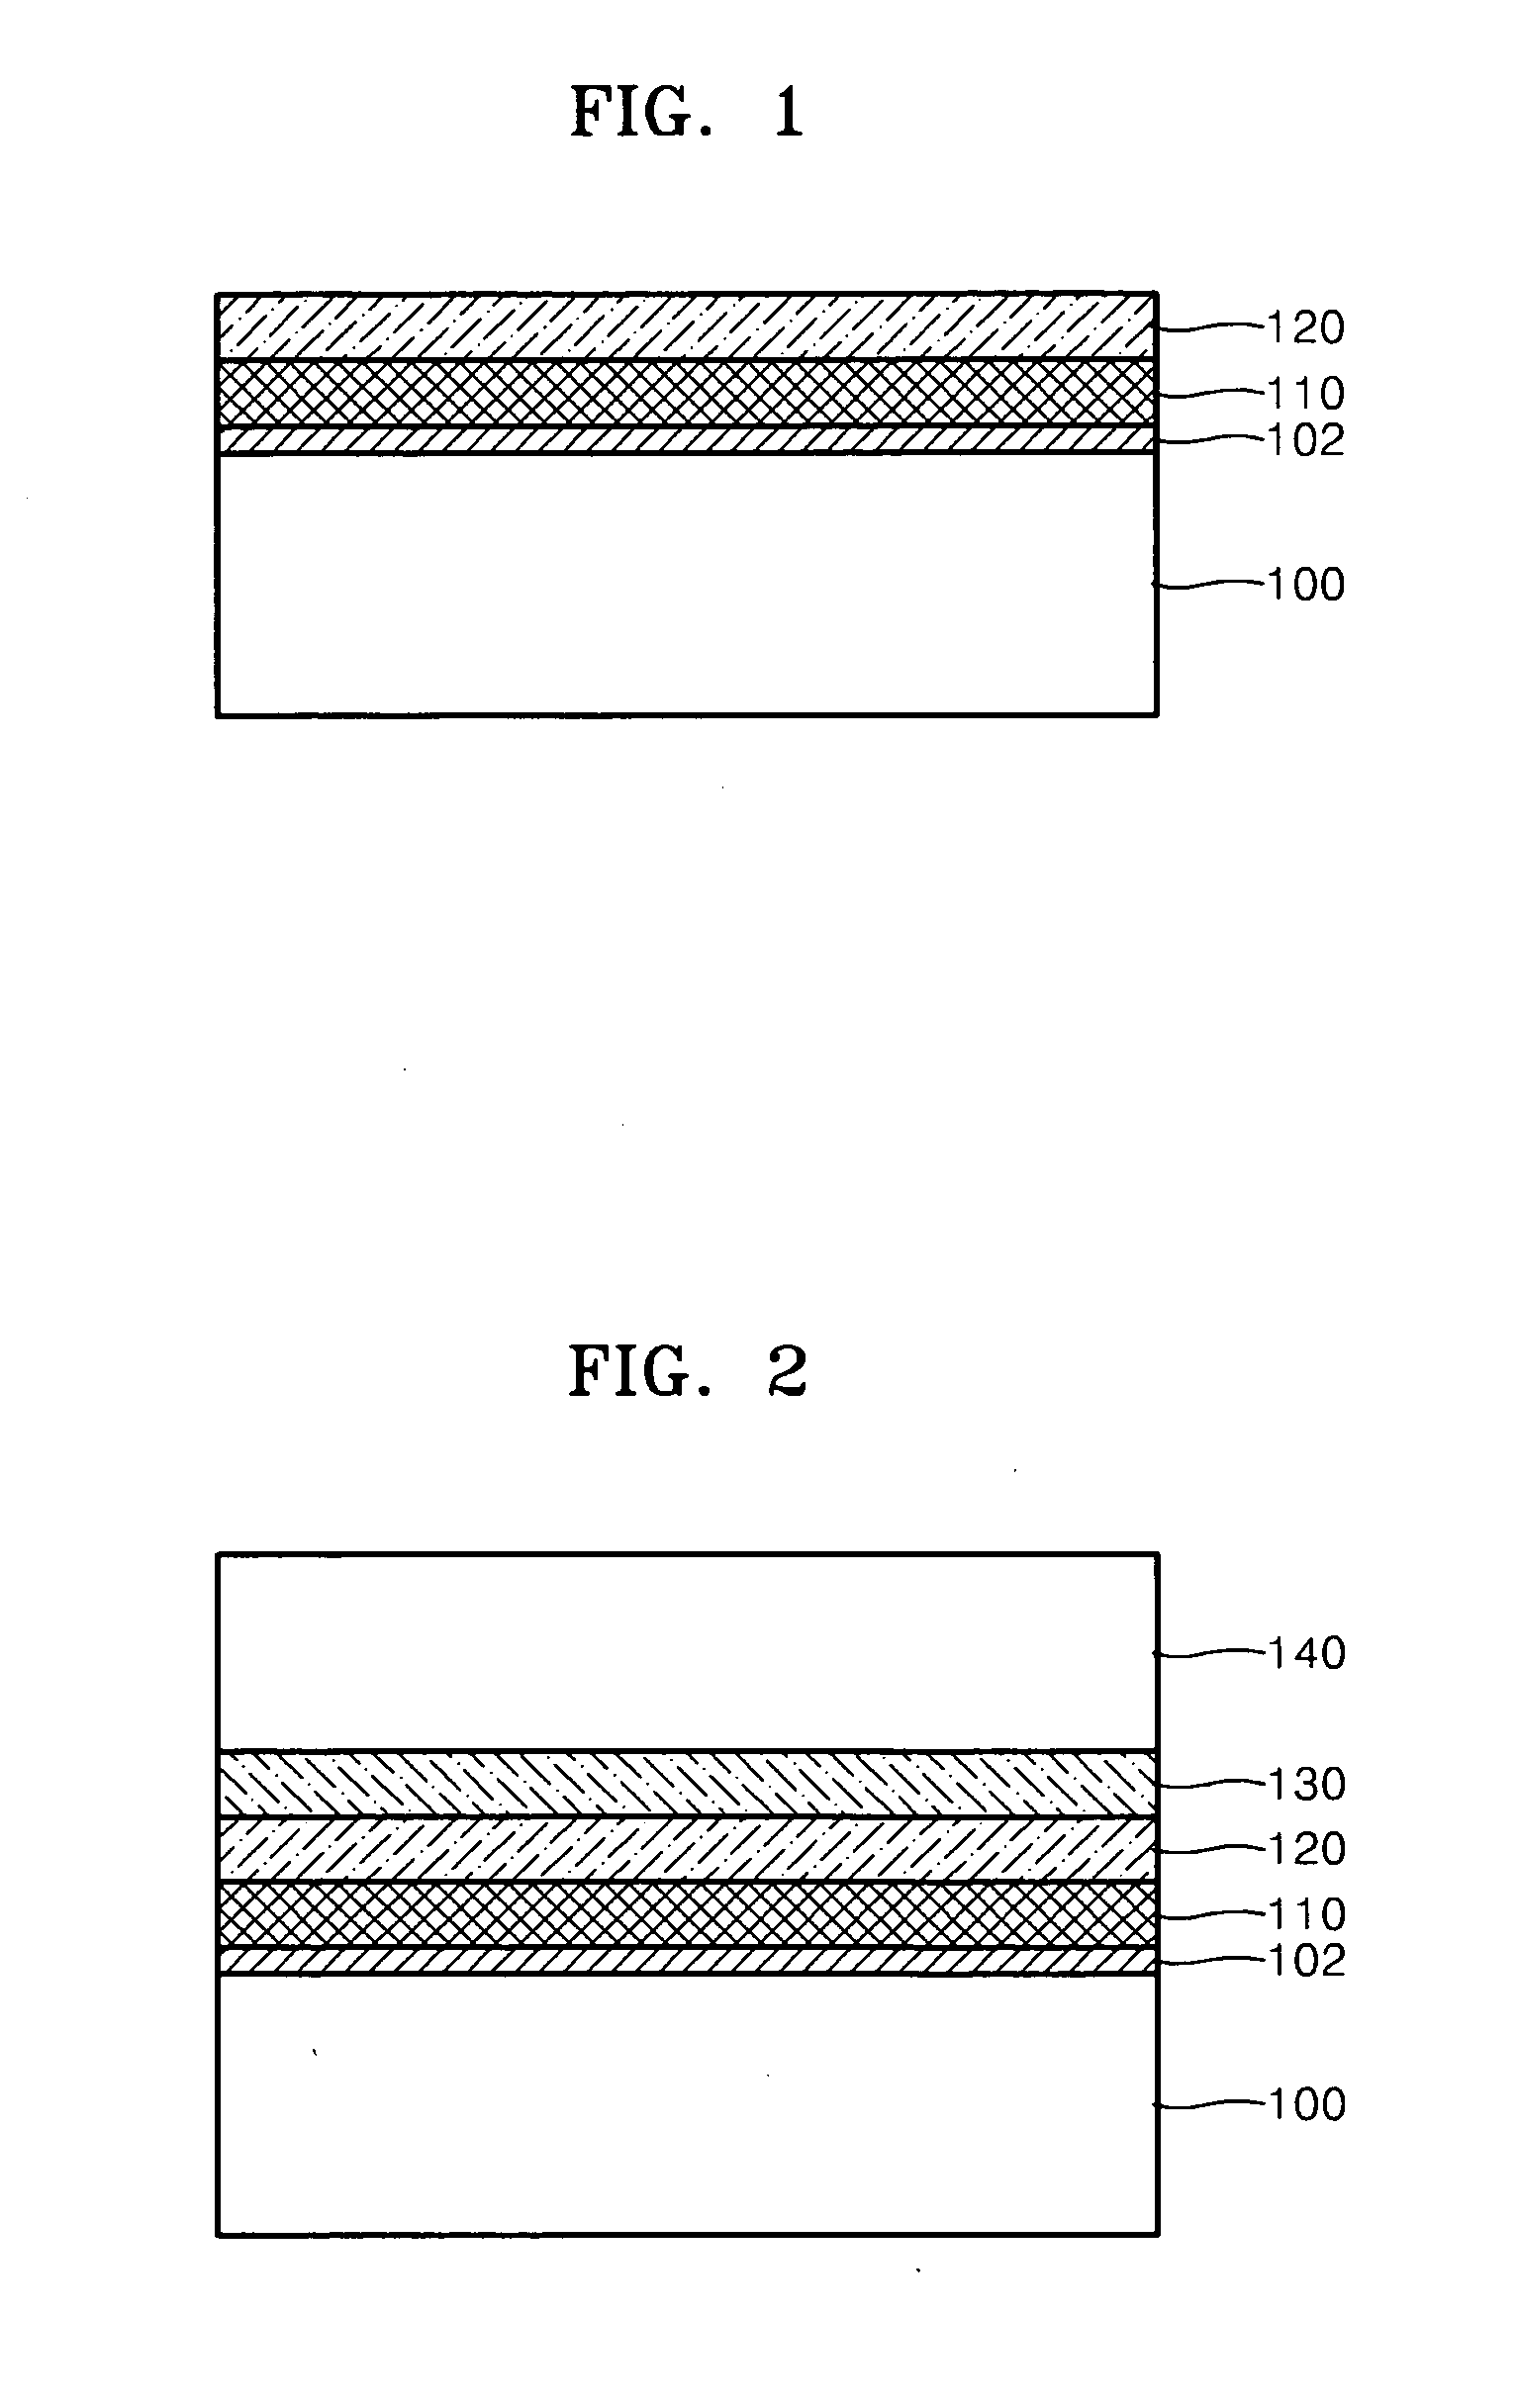 Methods of manufacturing and transferring larger-sized graphene